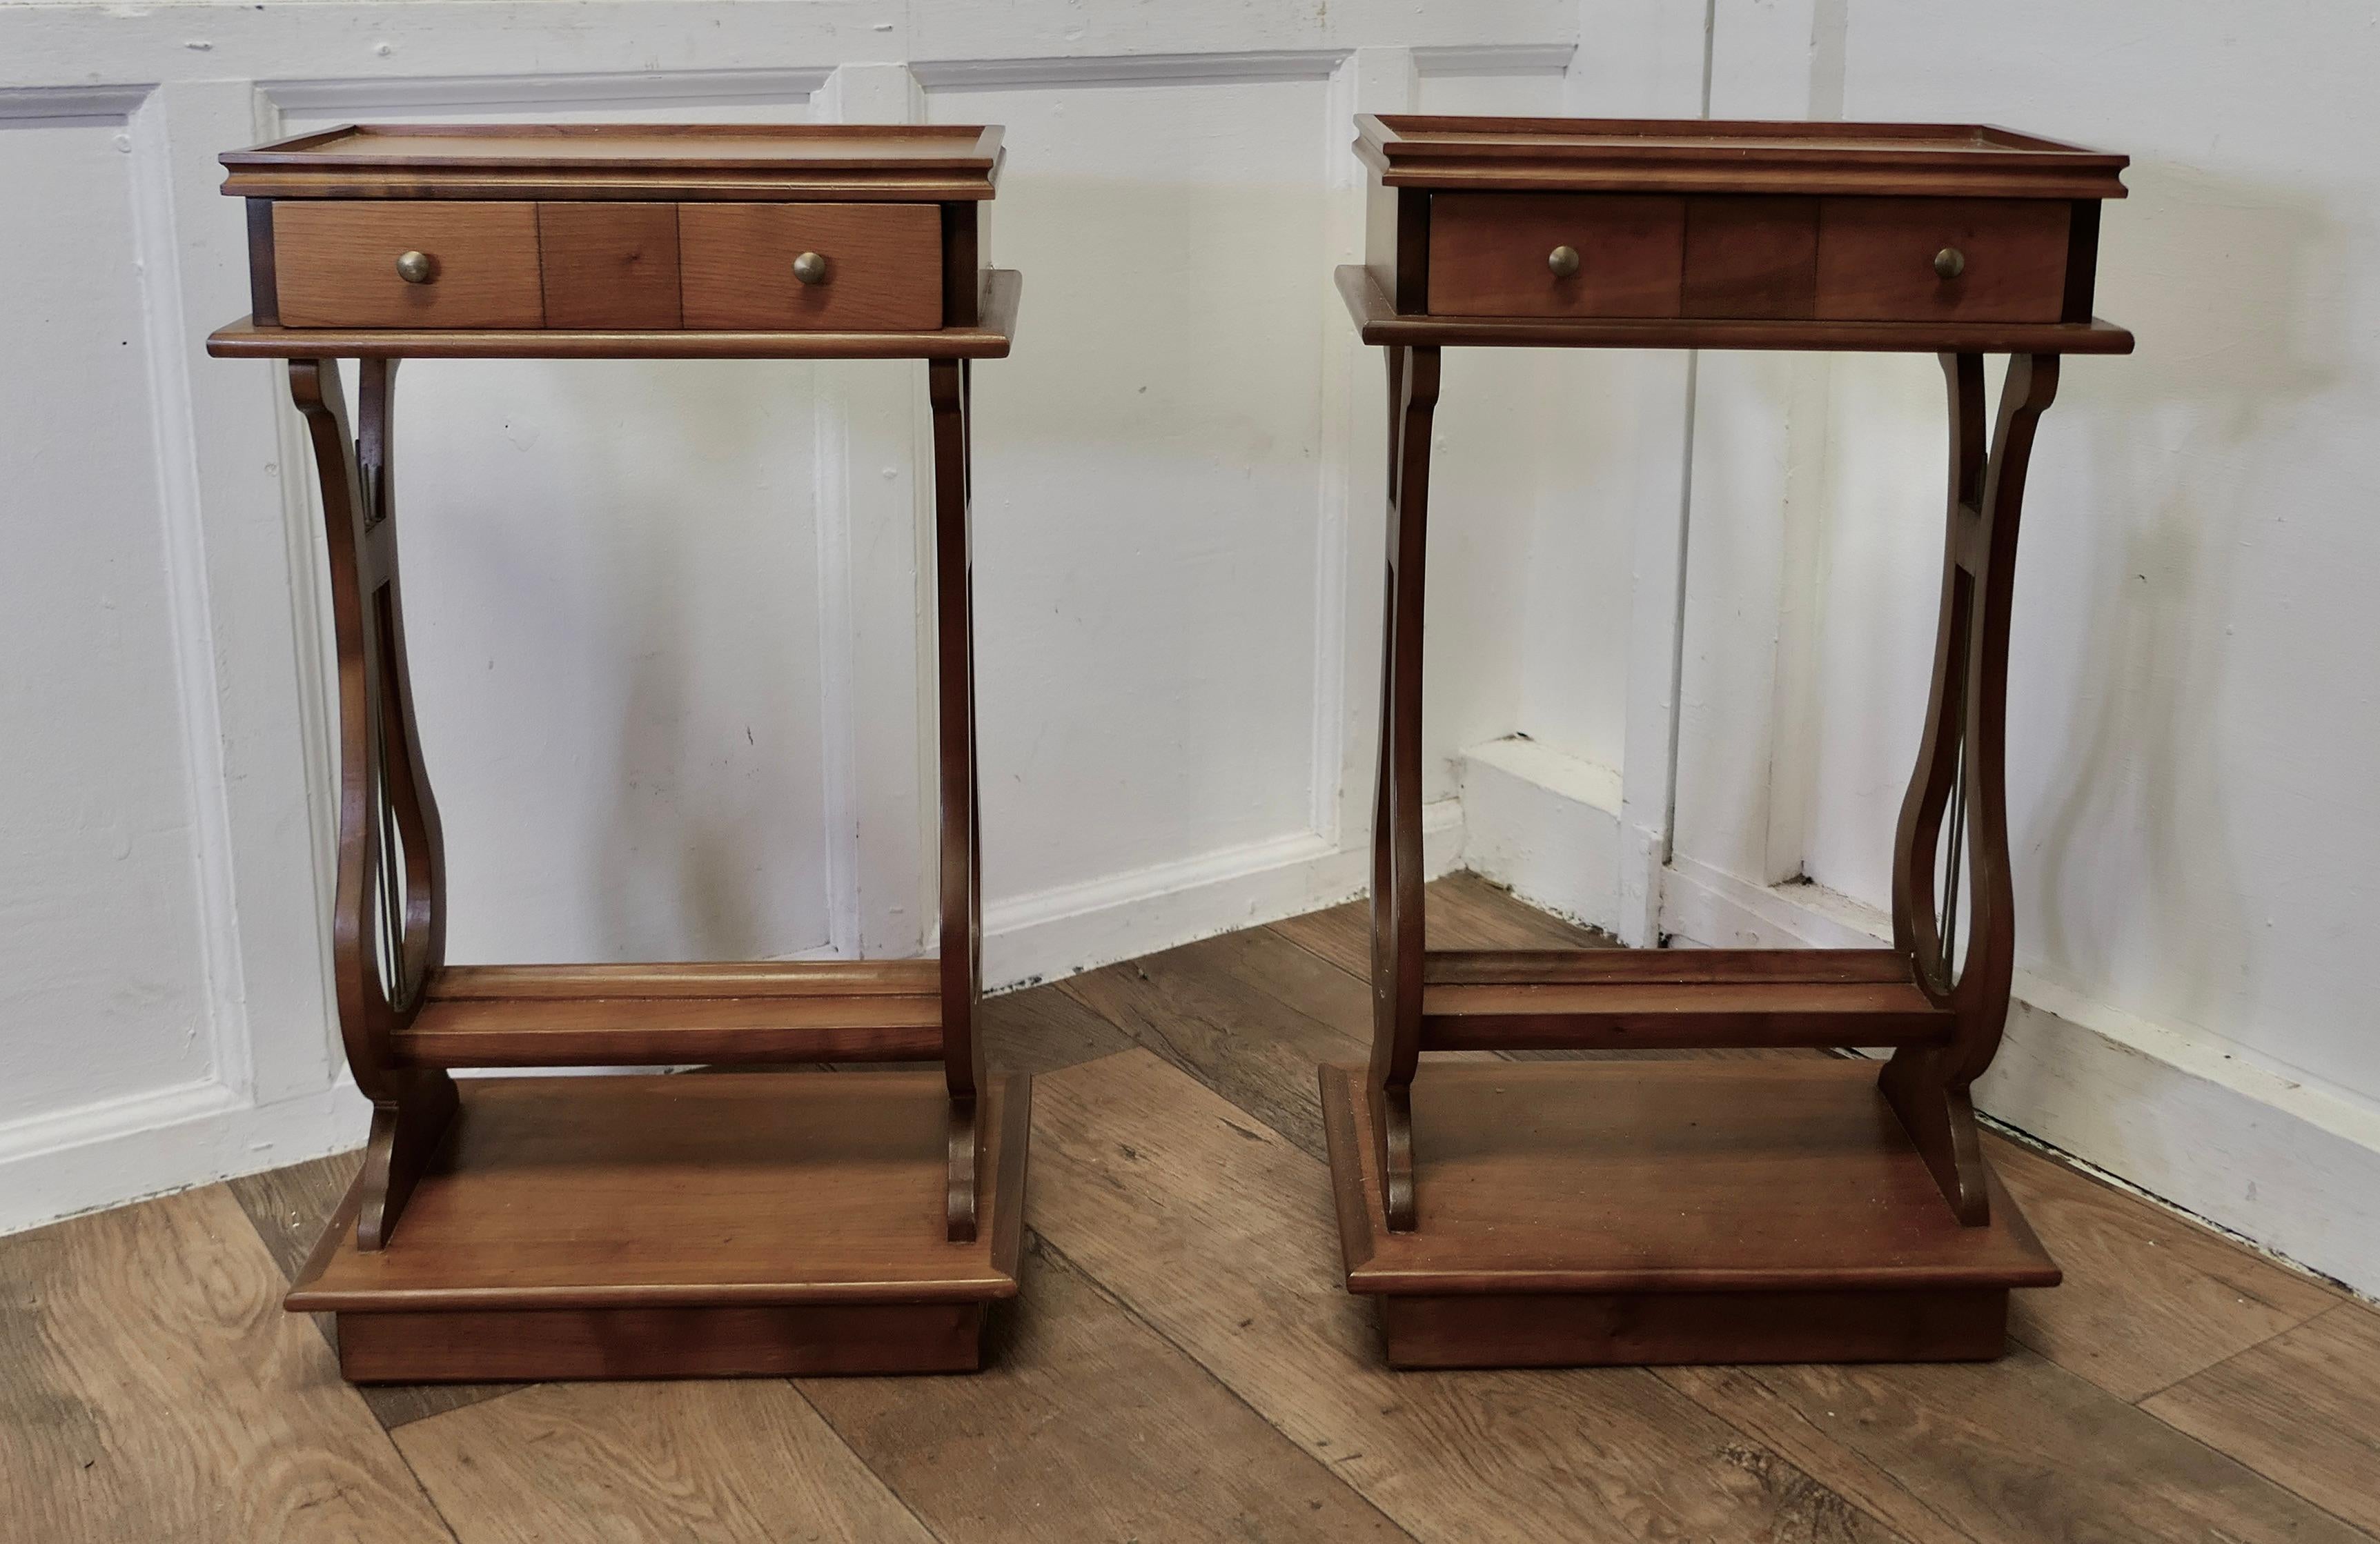 An Unusual Pair of Lyre Ended Cherrywood Lamp or Side Tables 

This is a very attractive pair, the tables have a small gallery around the top with a long drawer below, the legs resemble a Lyre with small brass rods and these are set on a solid